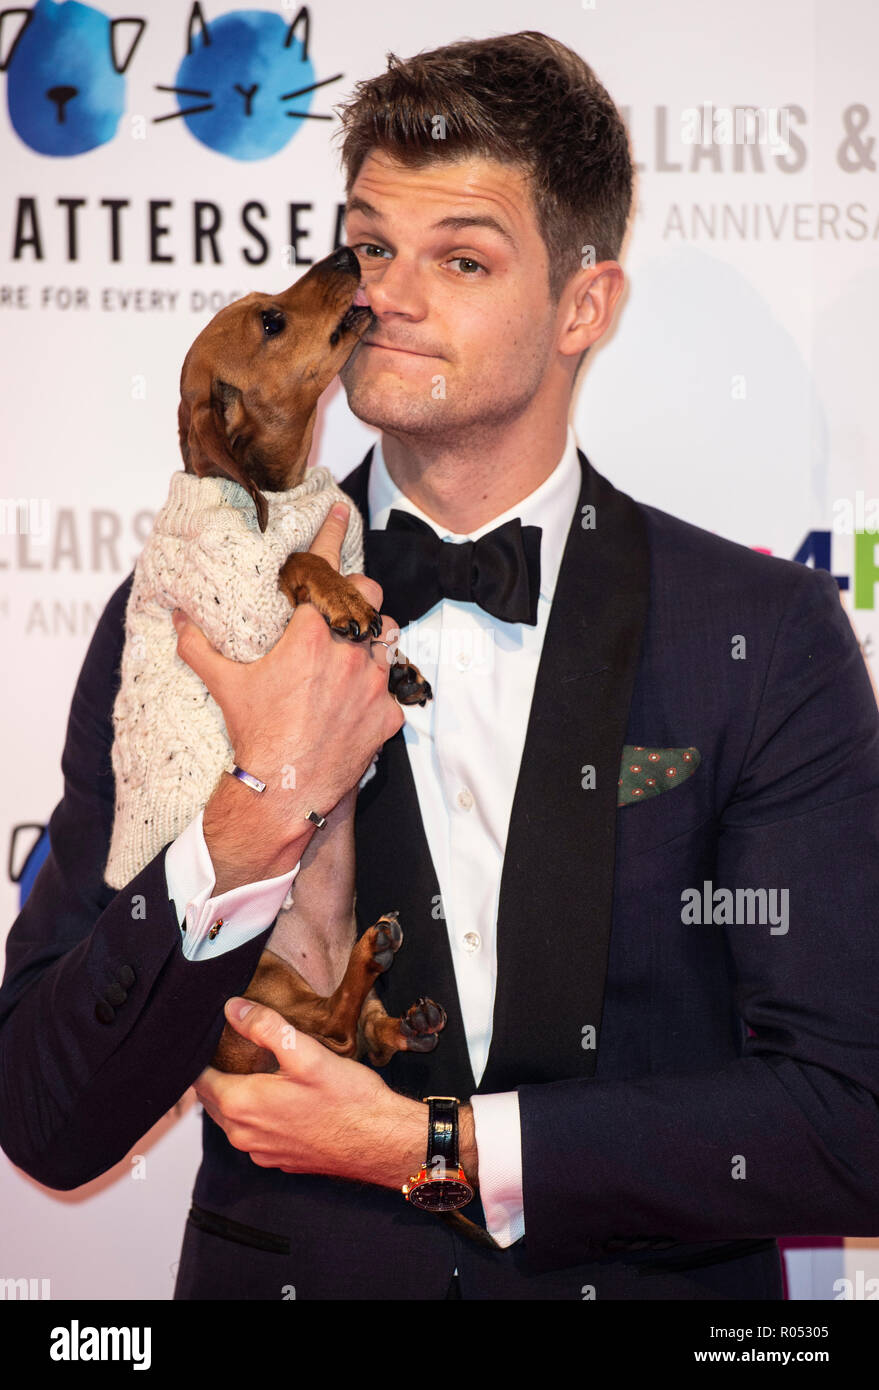 London, UK. 1st November, 2018. London, UK. 1st November, 2018. Jim Chapman attends the Battersea Dogs & Cats Home Collars & Coats Gala Ball 2018 at Battersea Evolution on November 01, 2018 in London, England Credit: Gary Mitchell, GMP Media/Alamy Live News Stock Photo